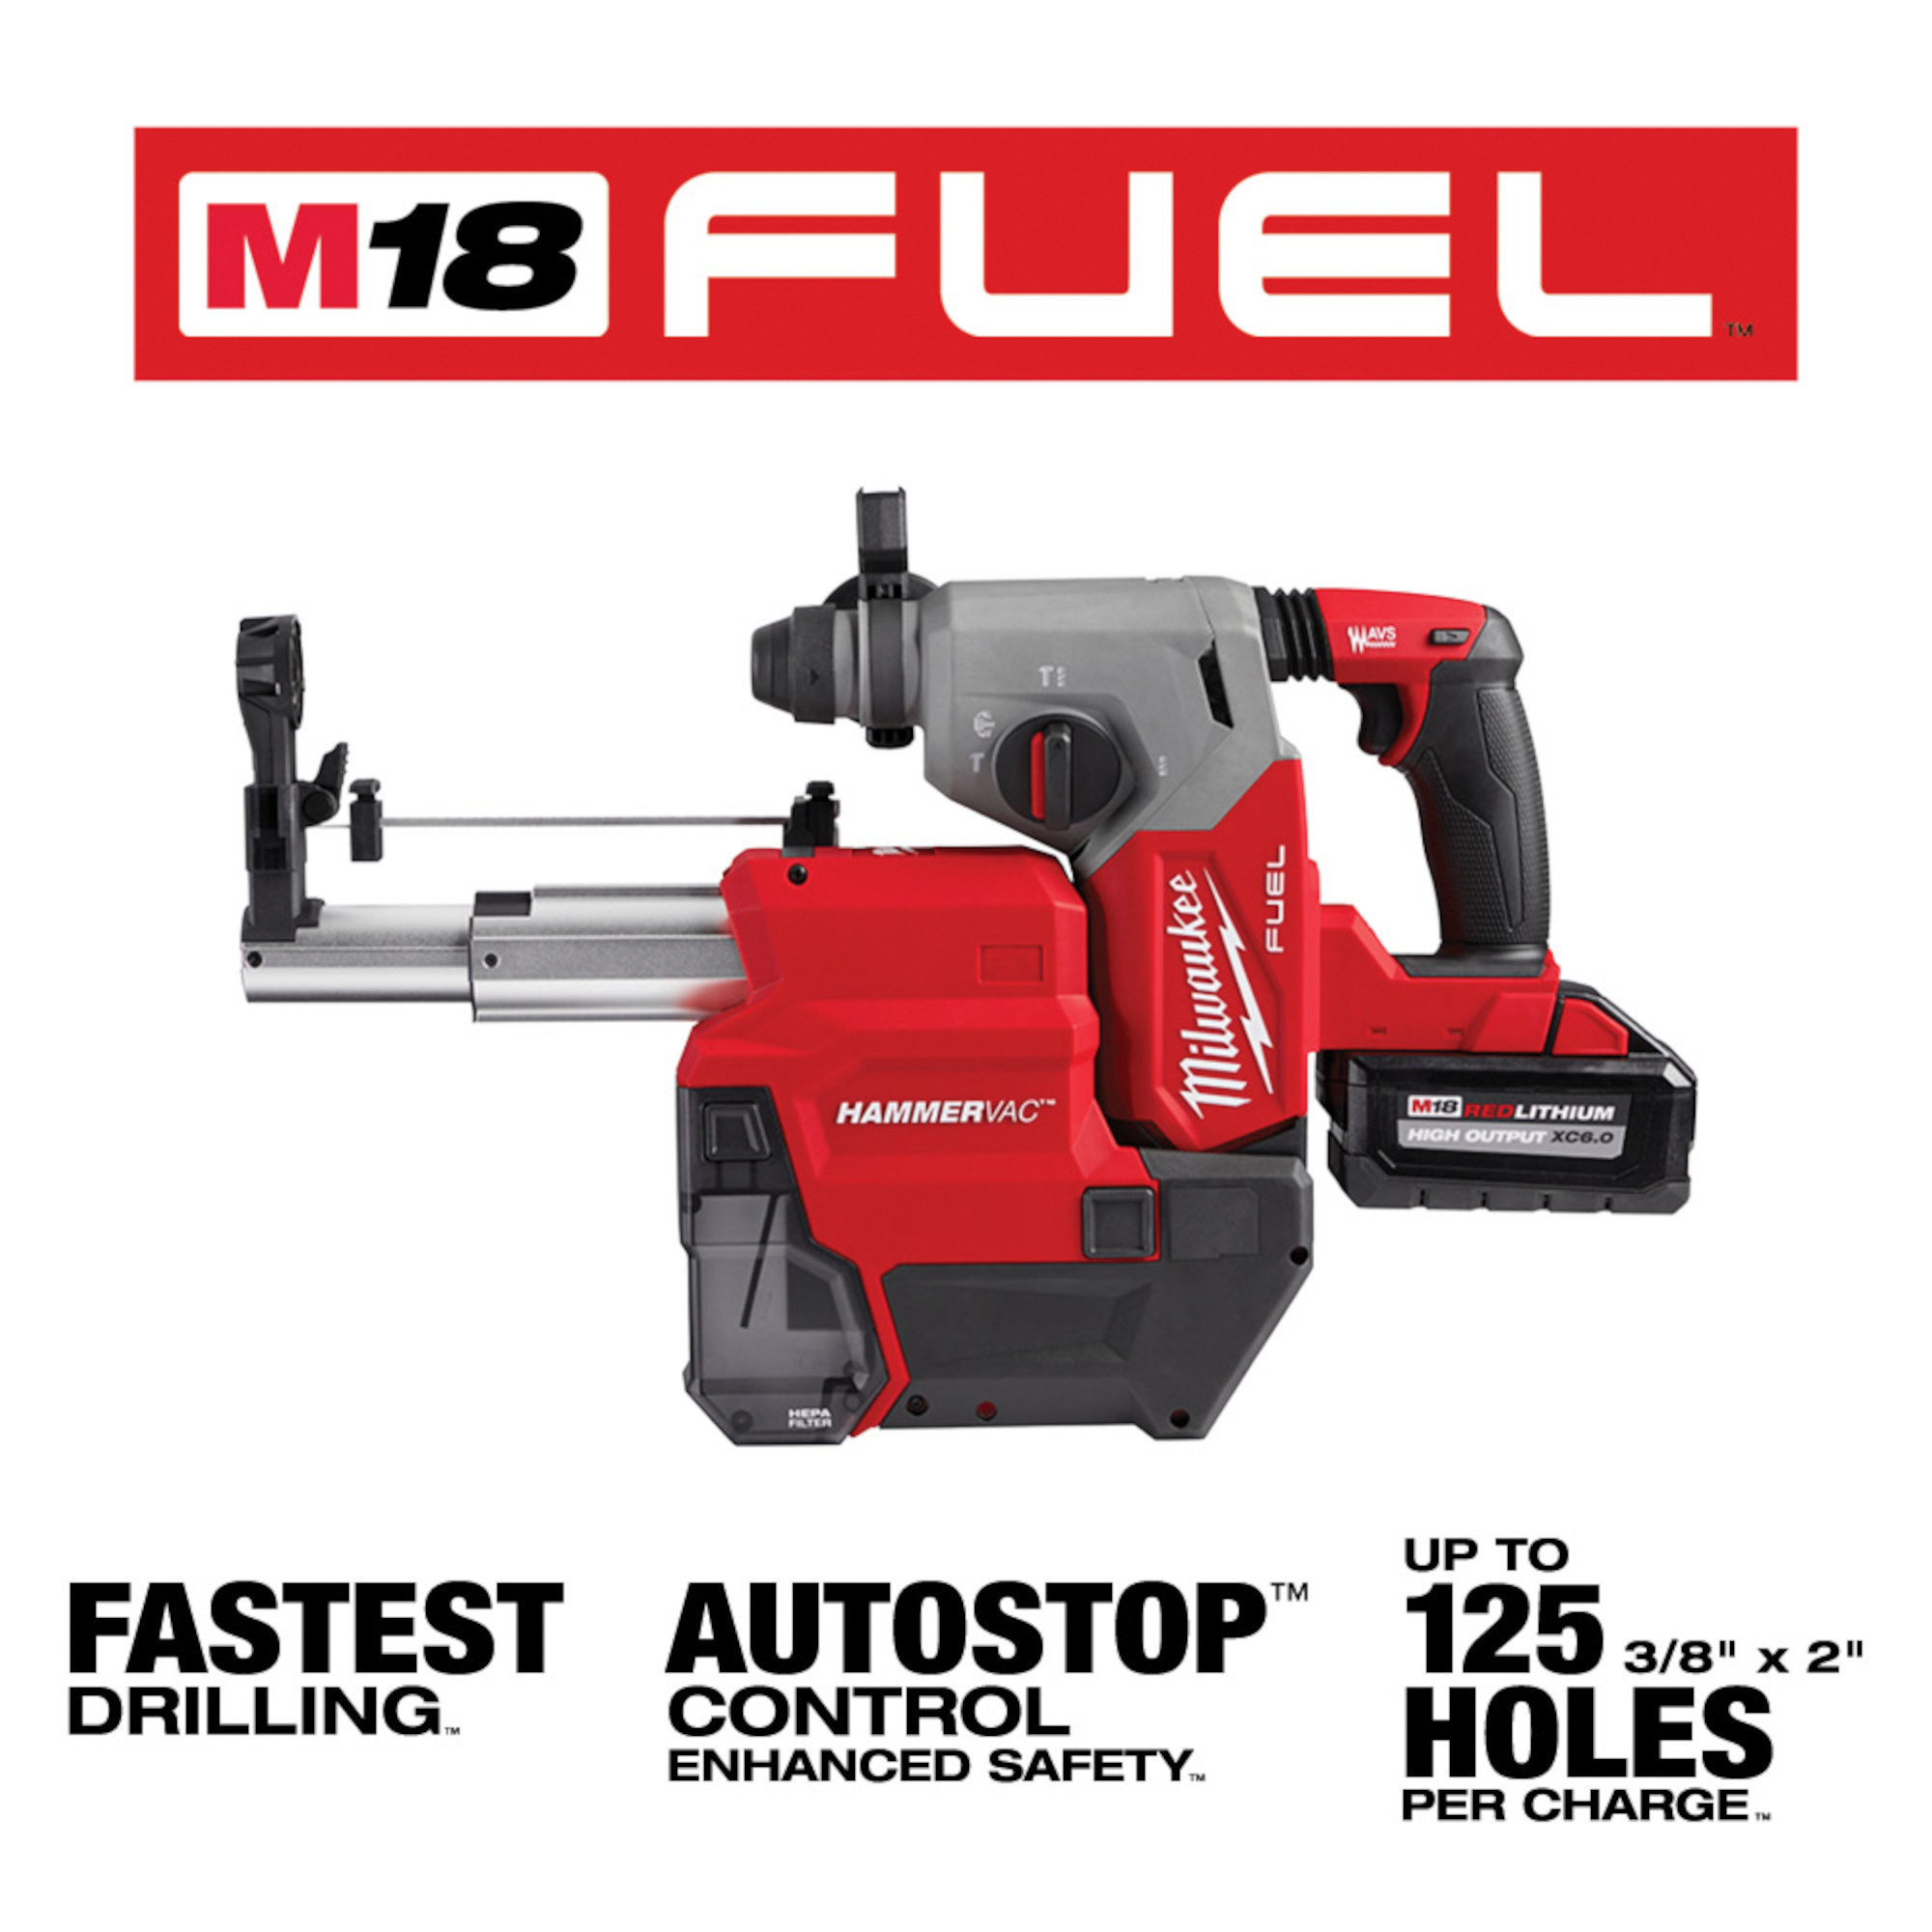 Milwaukee M18 FUEL 1in. SDS Plus Rotary Hammer with Dust Extractor Kit —  Batteries, Model# 2912-22DE Northern Tool